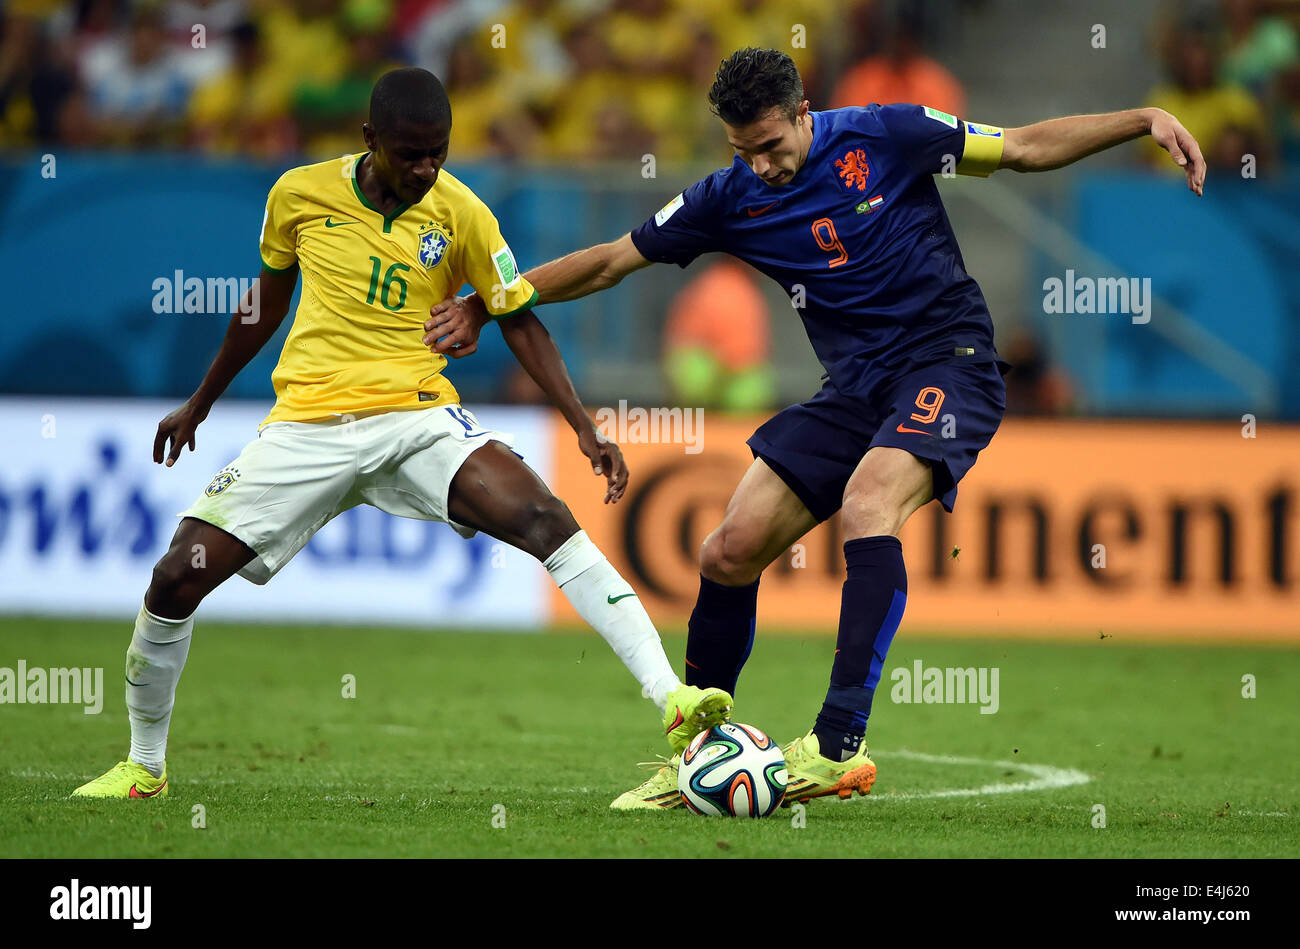 Brasilia, Brazil. 12th July, 2014. Brazil's Ramires (L) vies with Netherlands' Robin van Persie during the third place play-off match between Brazil and Netherlands of 2014 FIFA World Cup at the Estadio Nacional Stadium in Brasilia, Brazil, on July 12, 2014. Credit:  Guo Yong/Xinhua/Alamy Live News Stock Photo